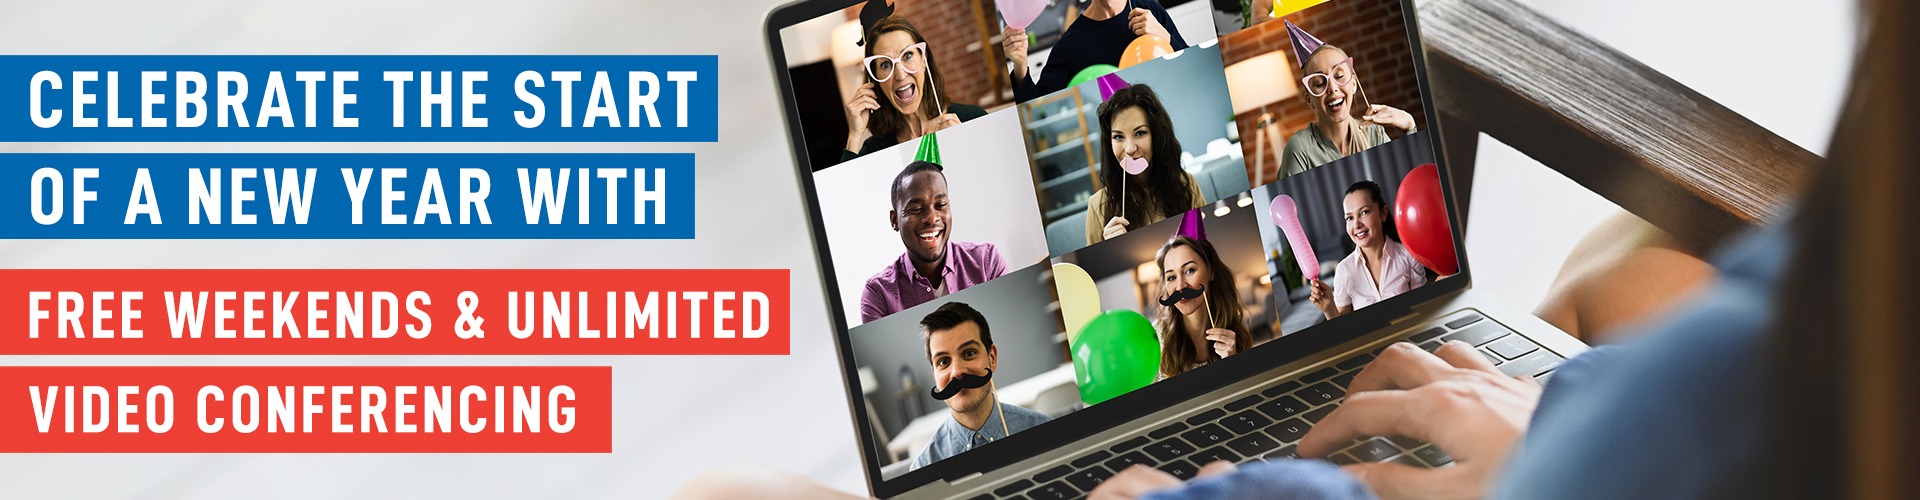 FREE weekends & Unlimited Video Conferencing